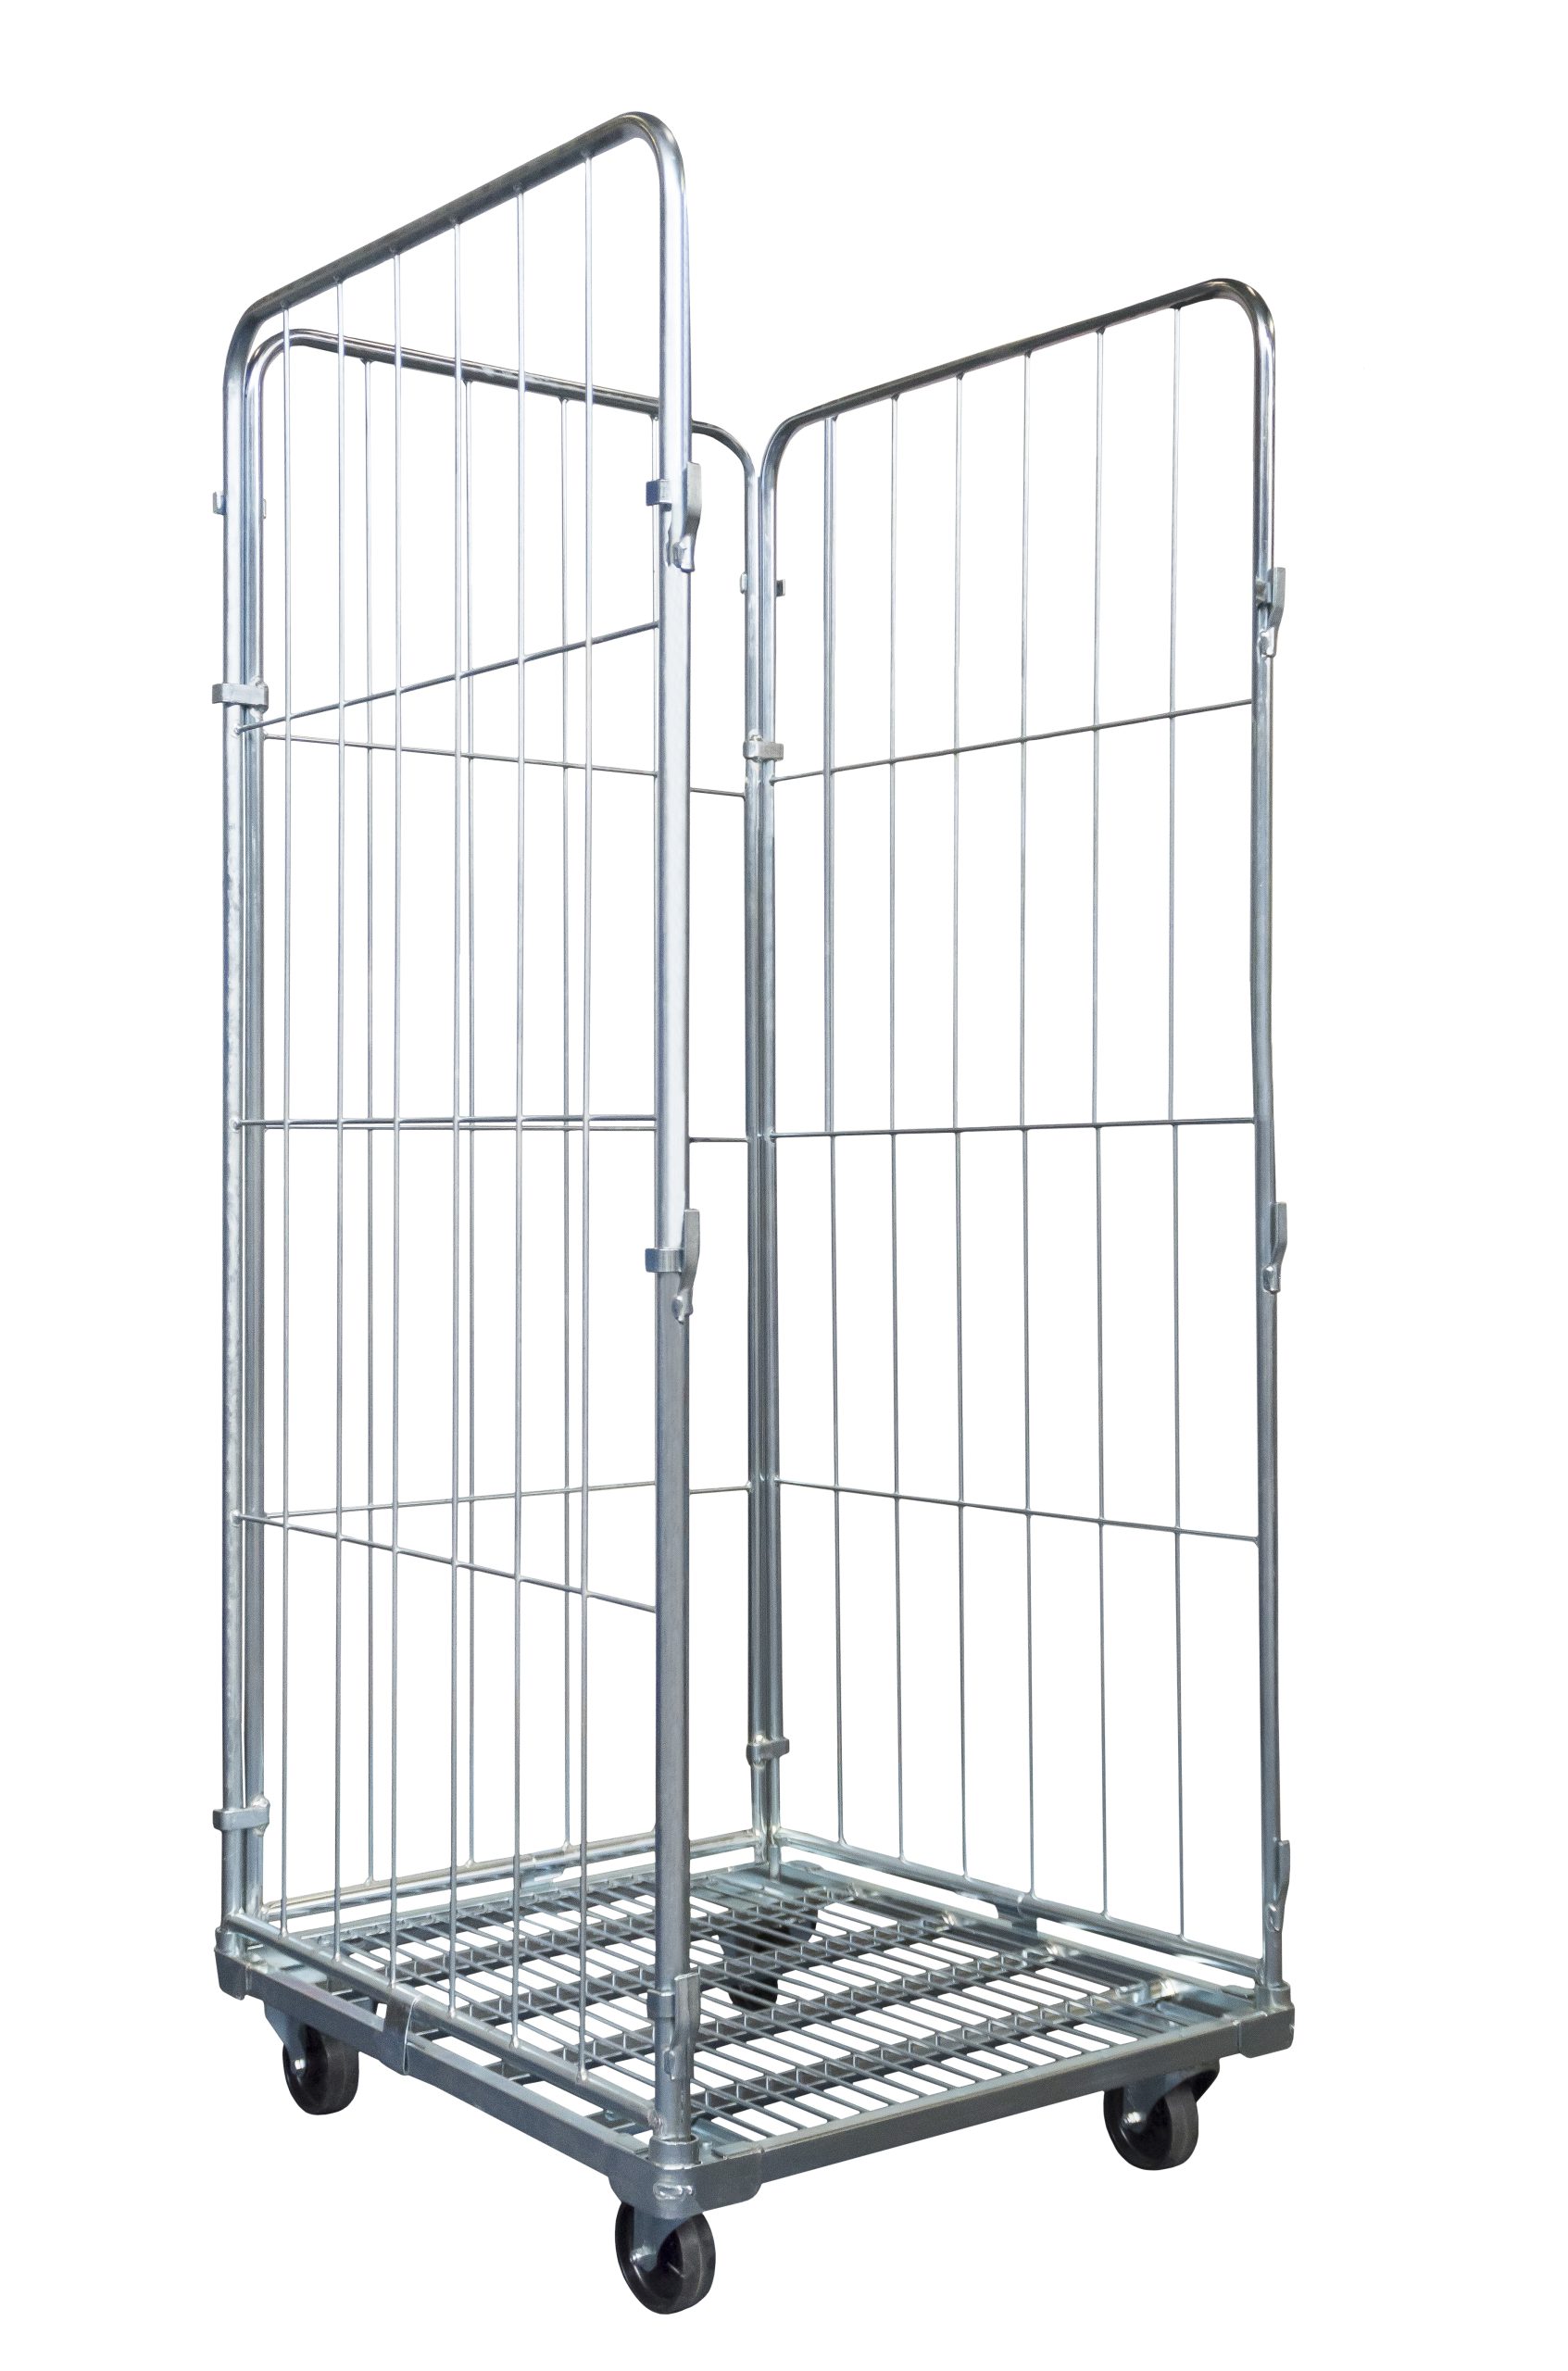 400 Hinged rent | Container 800x720x1800 Load Roll Laundry kg Front Cage Rotomrent for mm Capacity Gate,